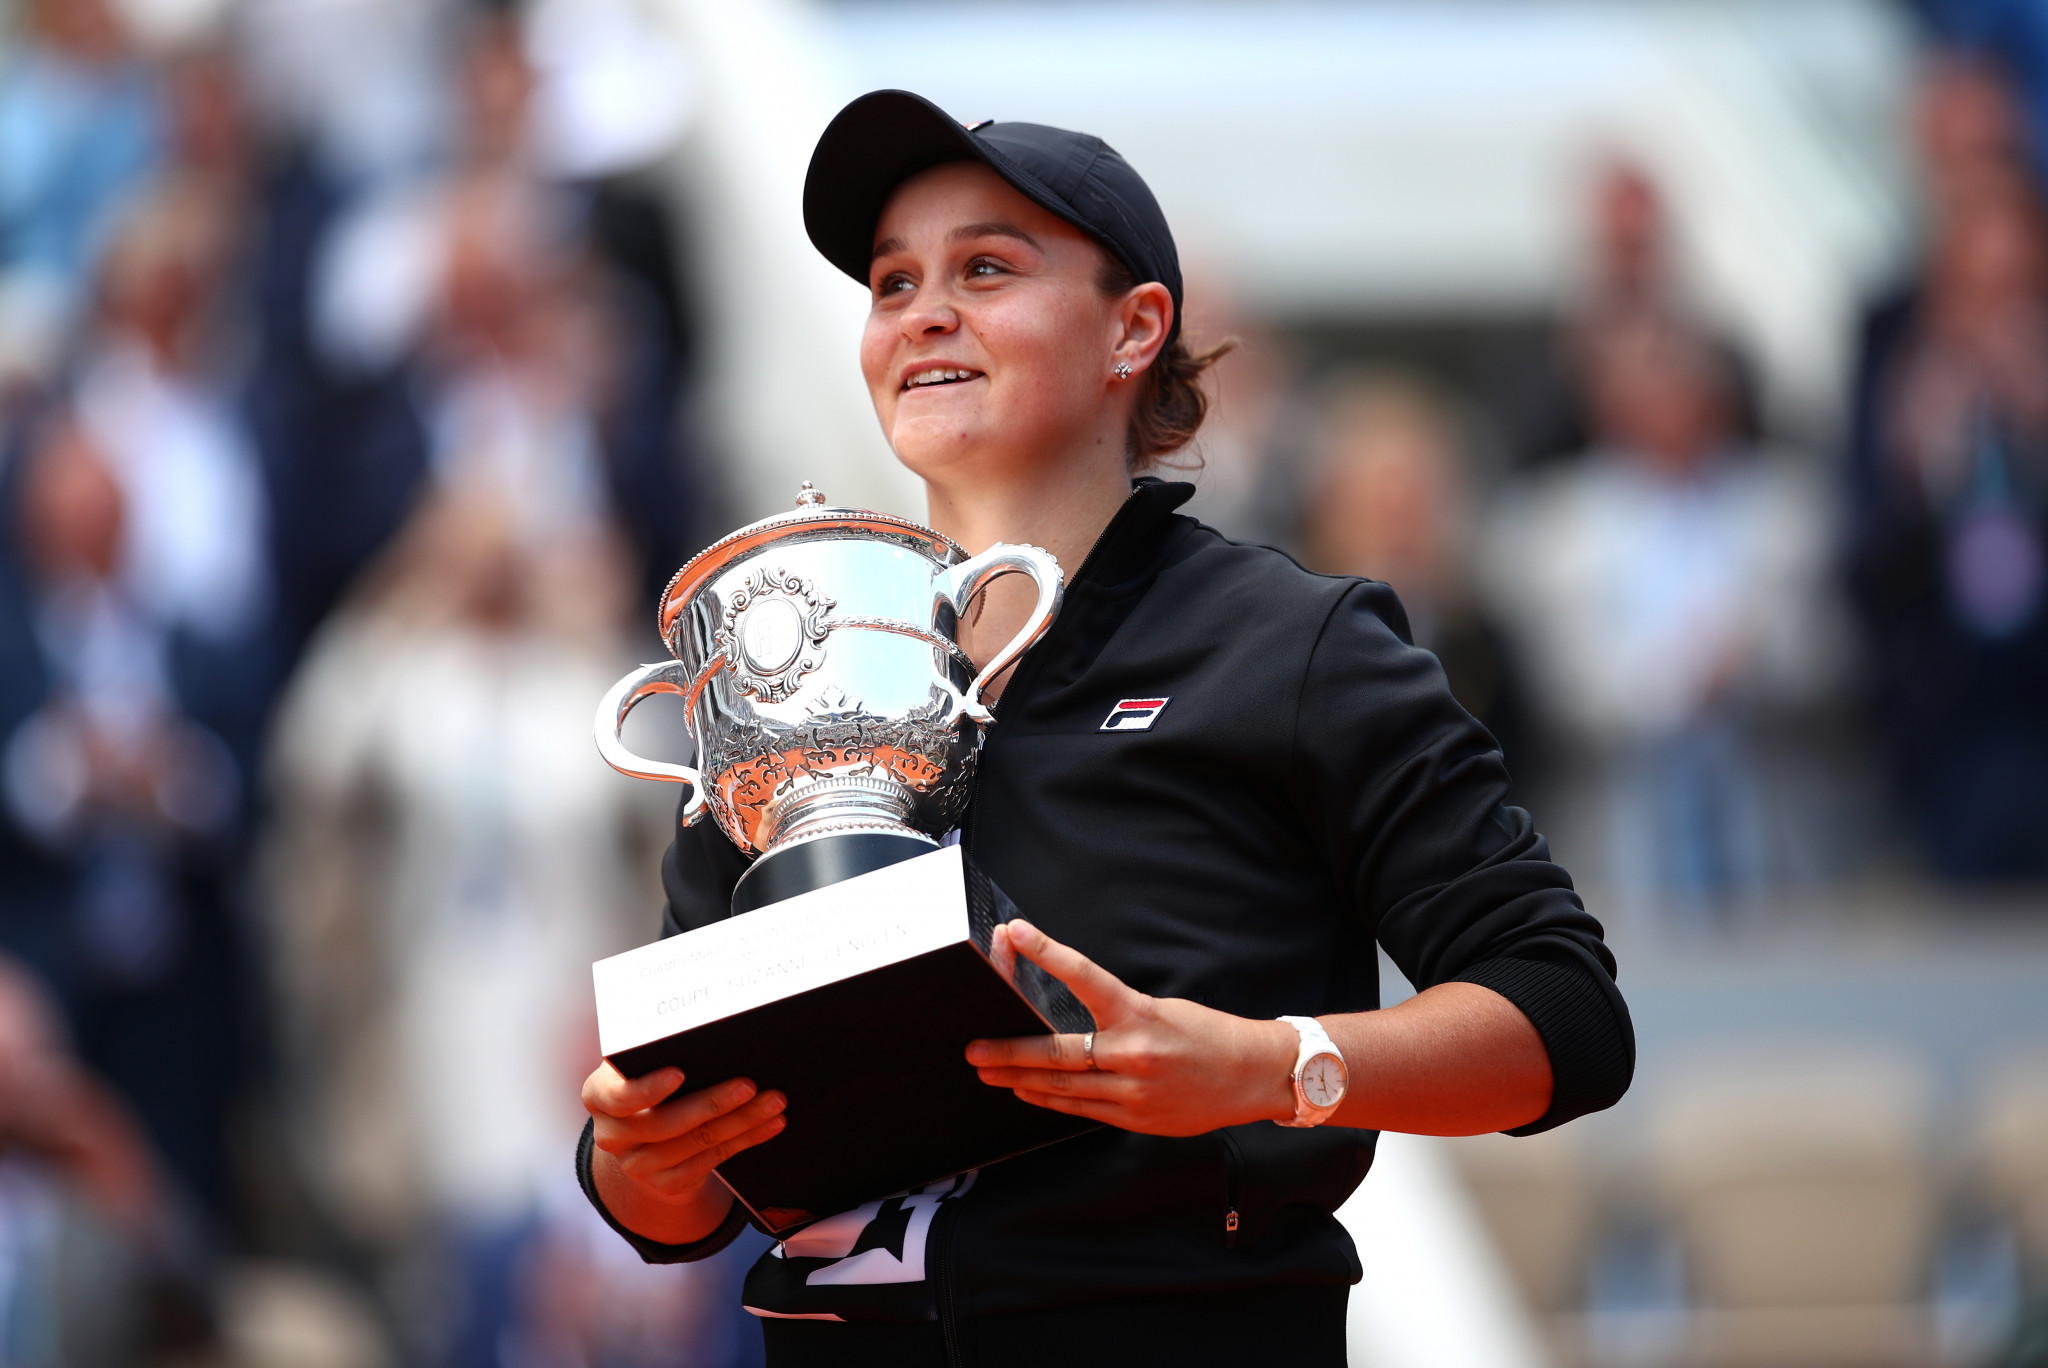 Australia's Ashleigh Barty won her first Grand Slam title by defeating Czech Republic's Marketa Vondroušová 6-3, 6-1 in the French Open final ©Getty Images